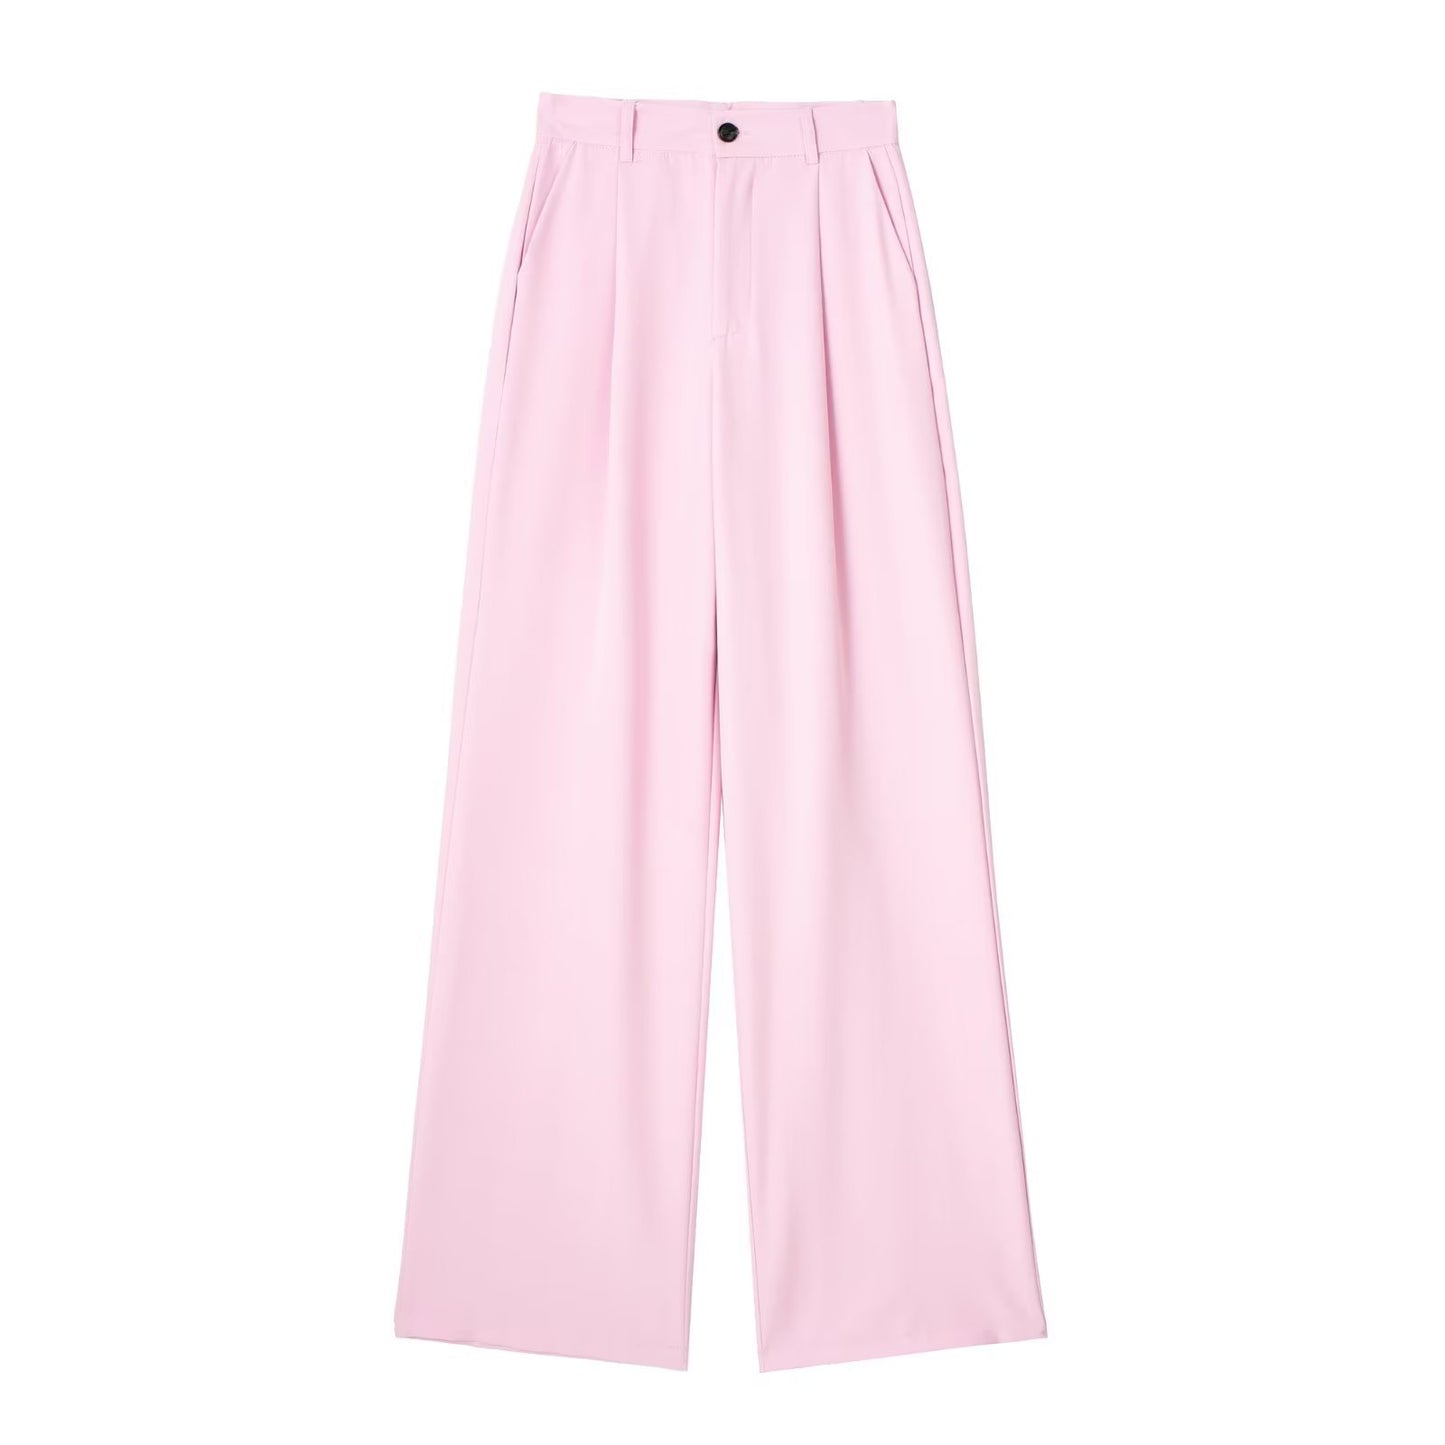 Women's French-style Pleated High-waist Wide-leg Trousers